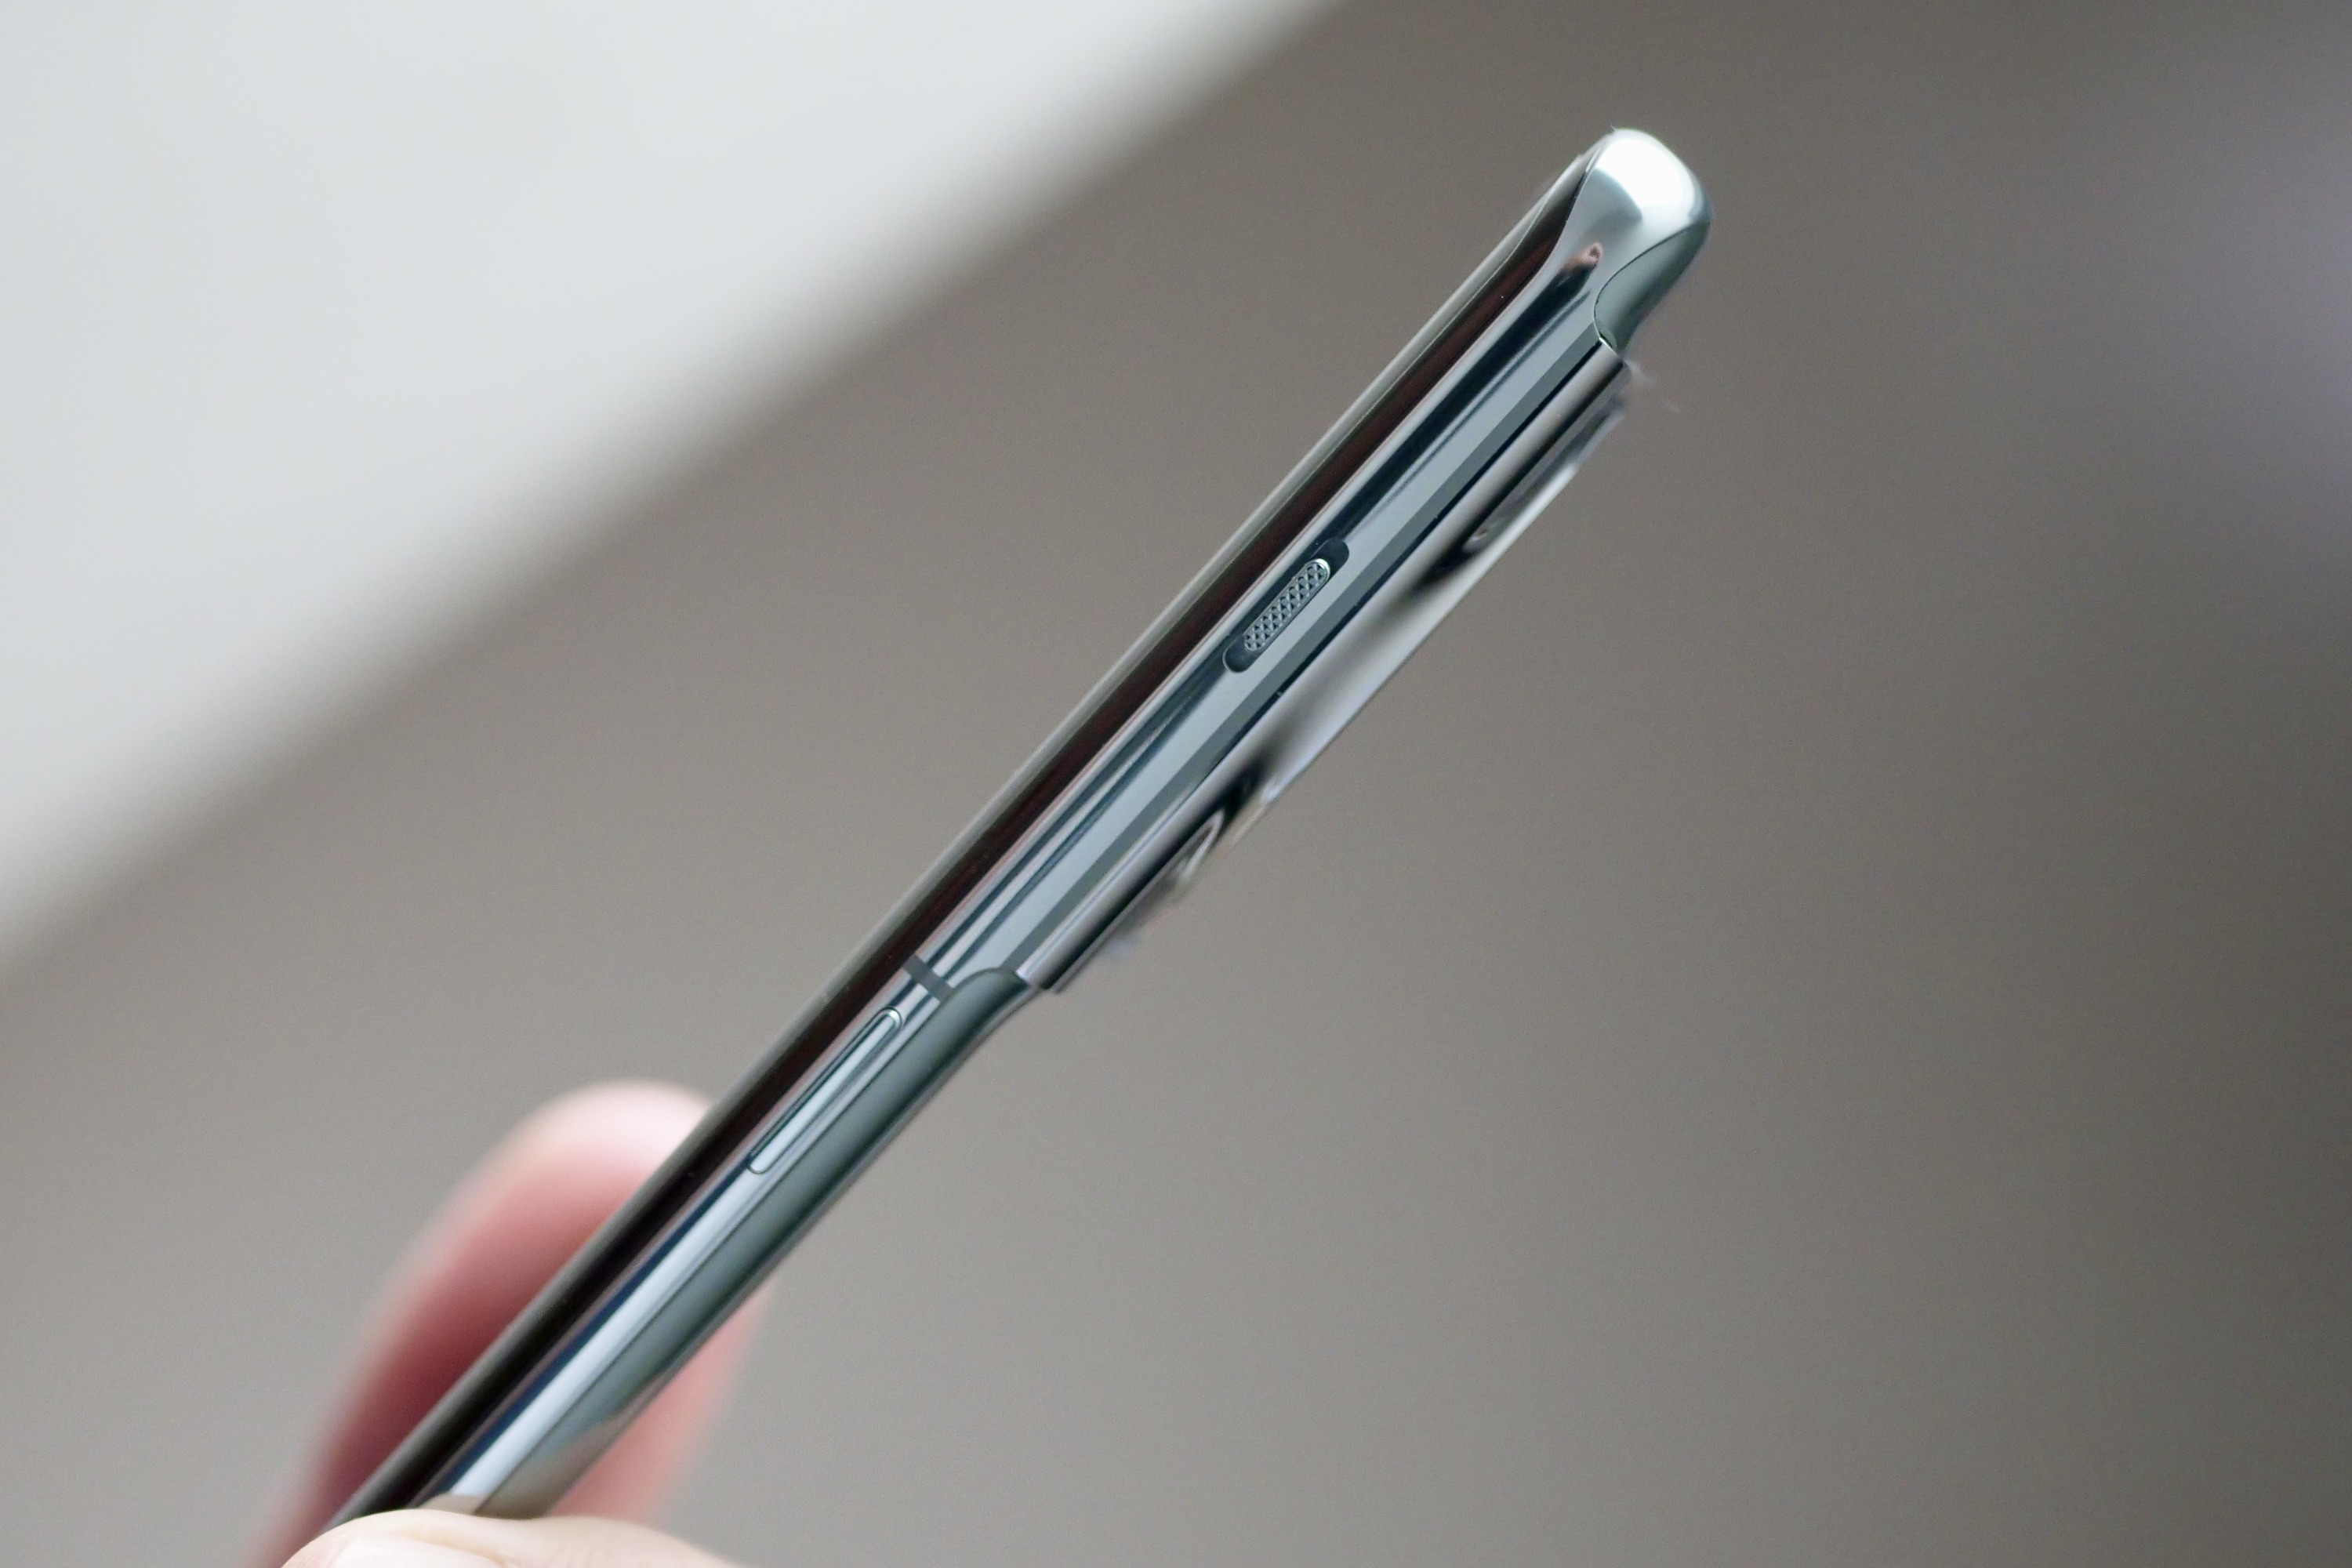 Review - OnePlus 11: Return to form